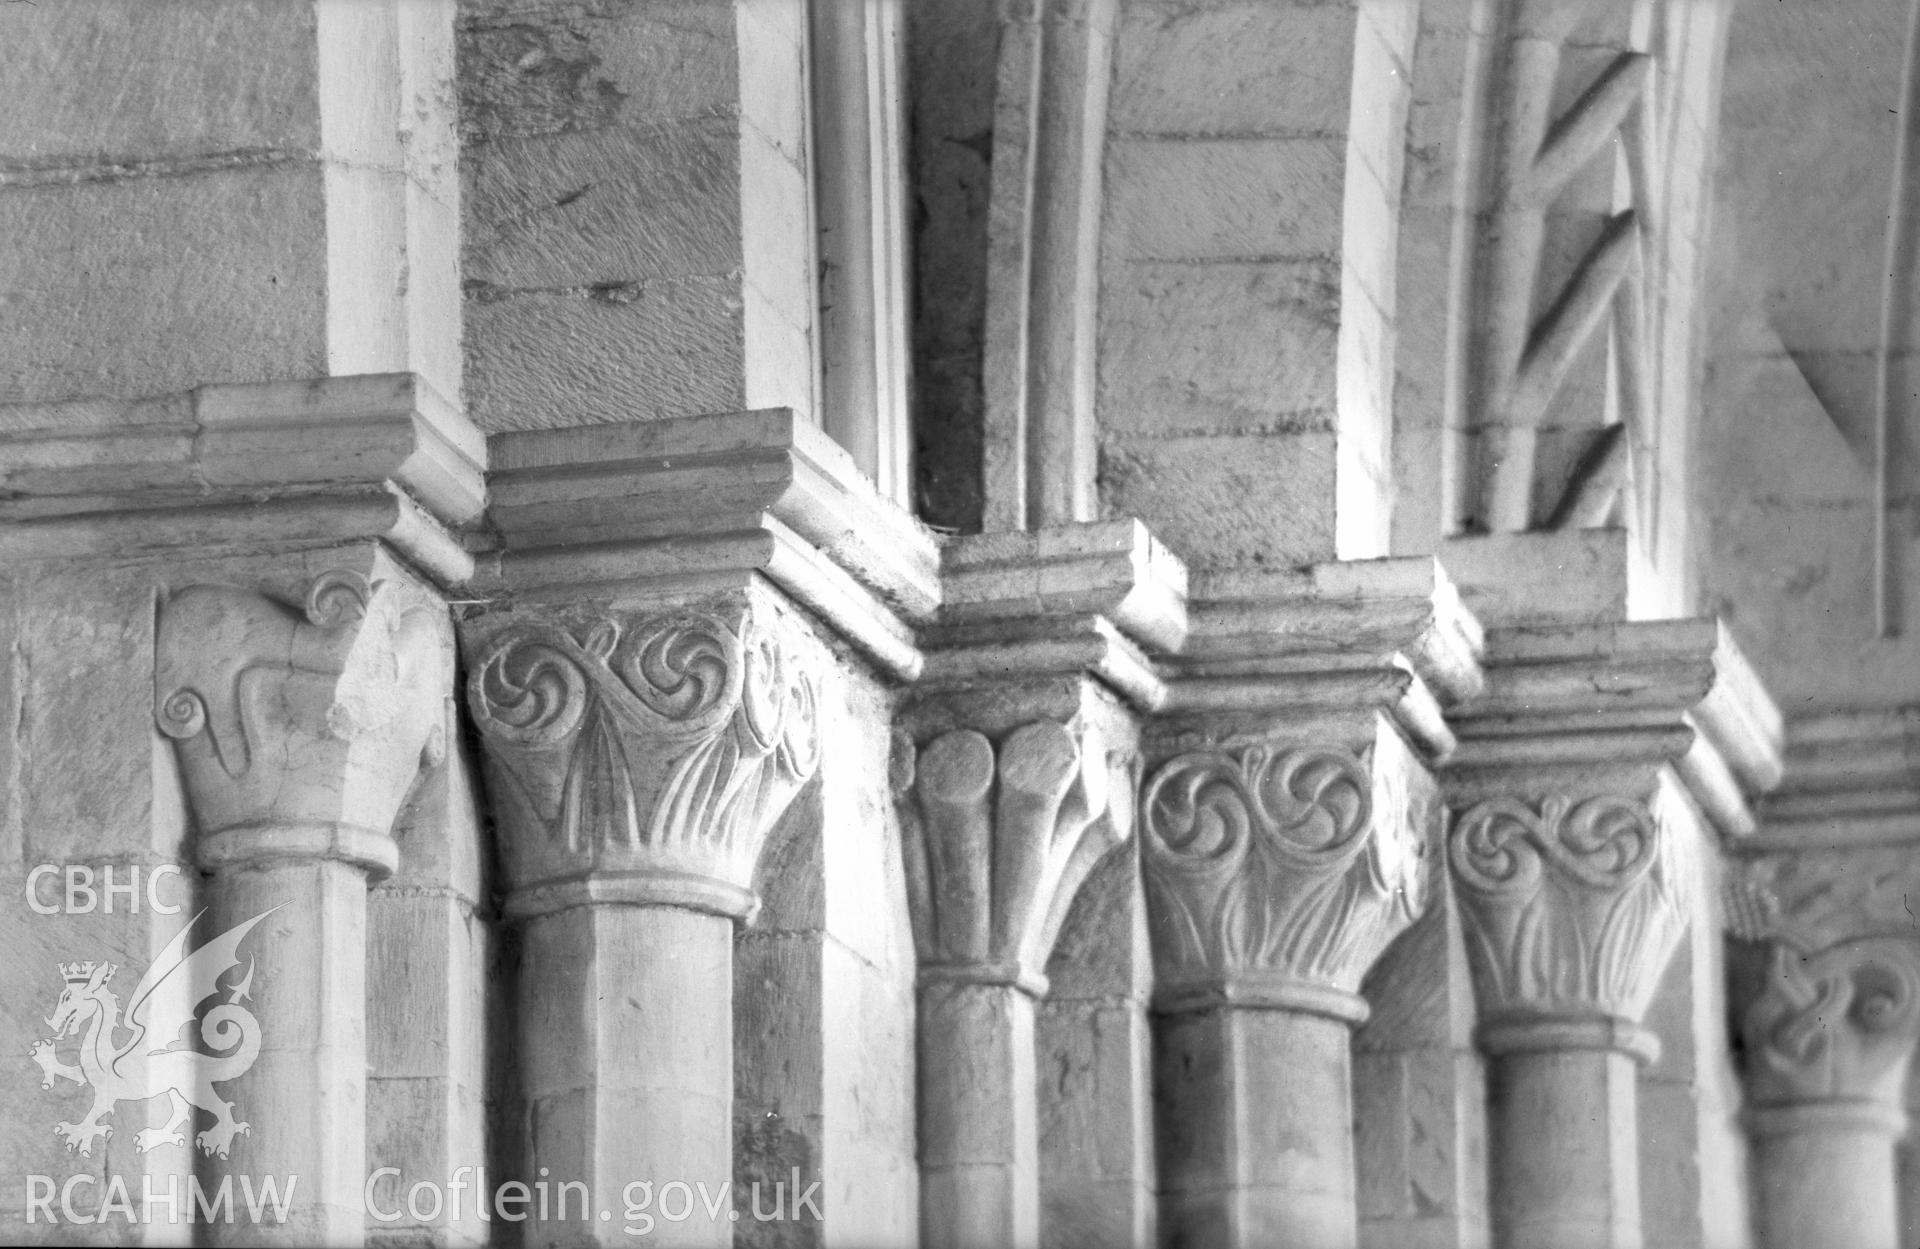 Digital copy of a black and white acetate negative showing detail of capital at St. David's Cathedral, taken by E.W. Lovegrove, July 1936